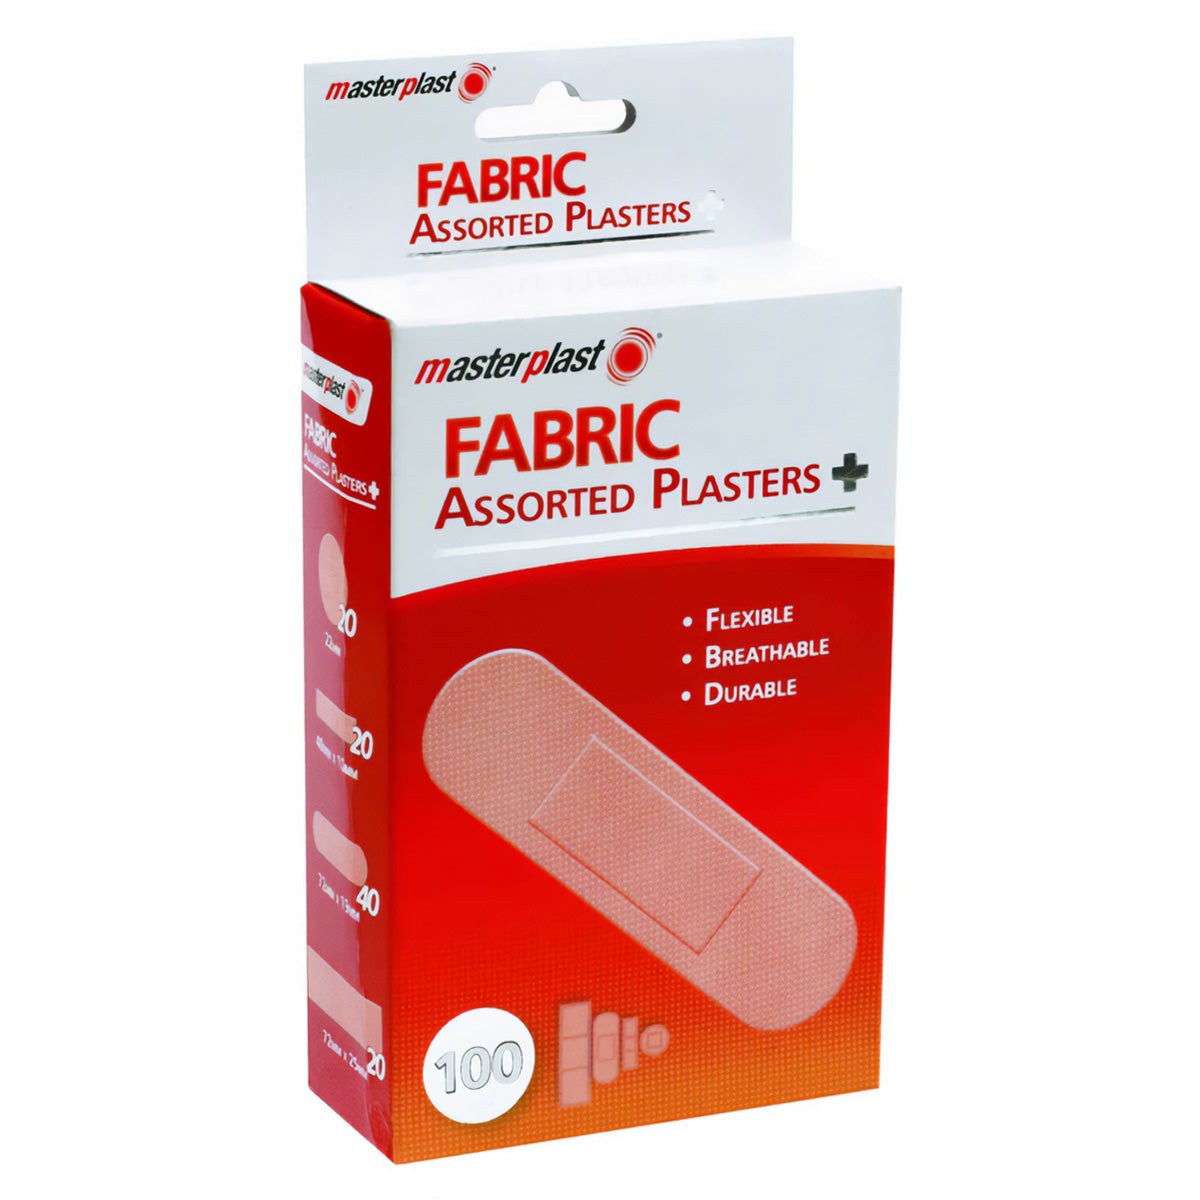 Masterplast - Fabric Assorted Plasters - 100 Pack - Continental Food Store